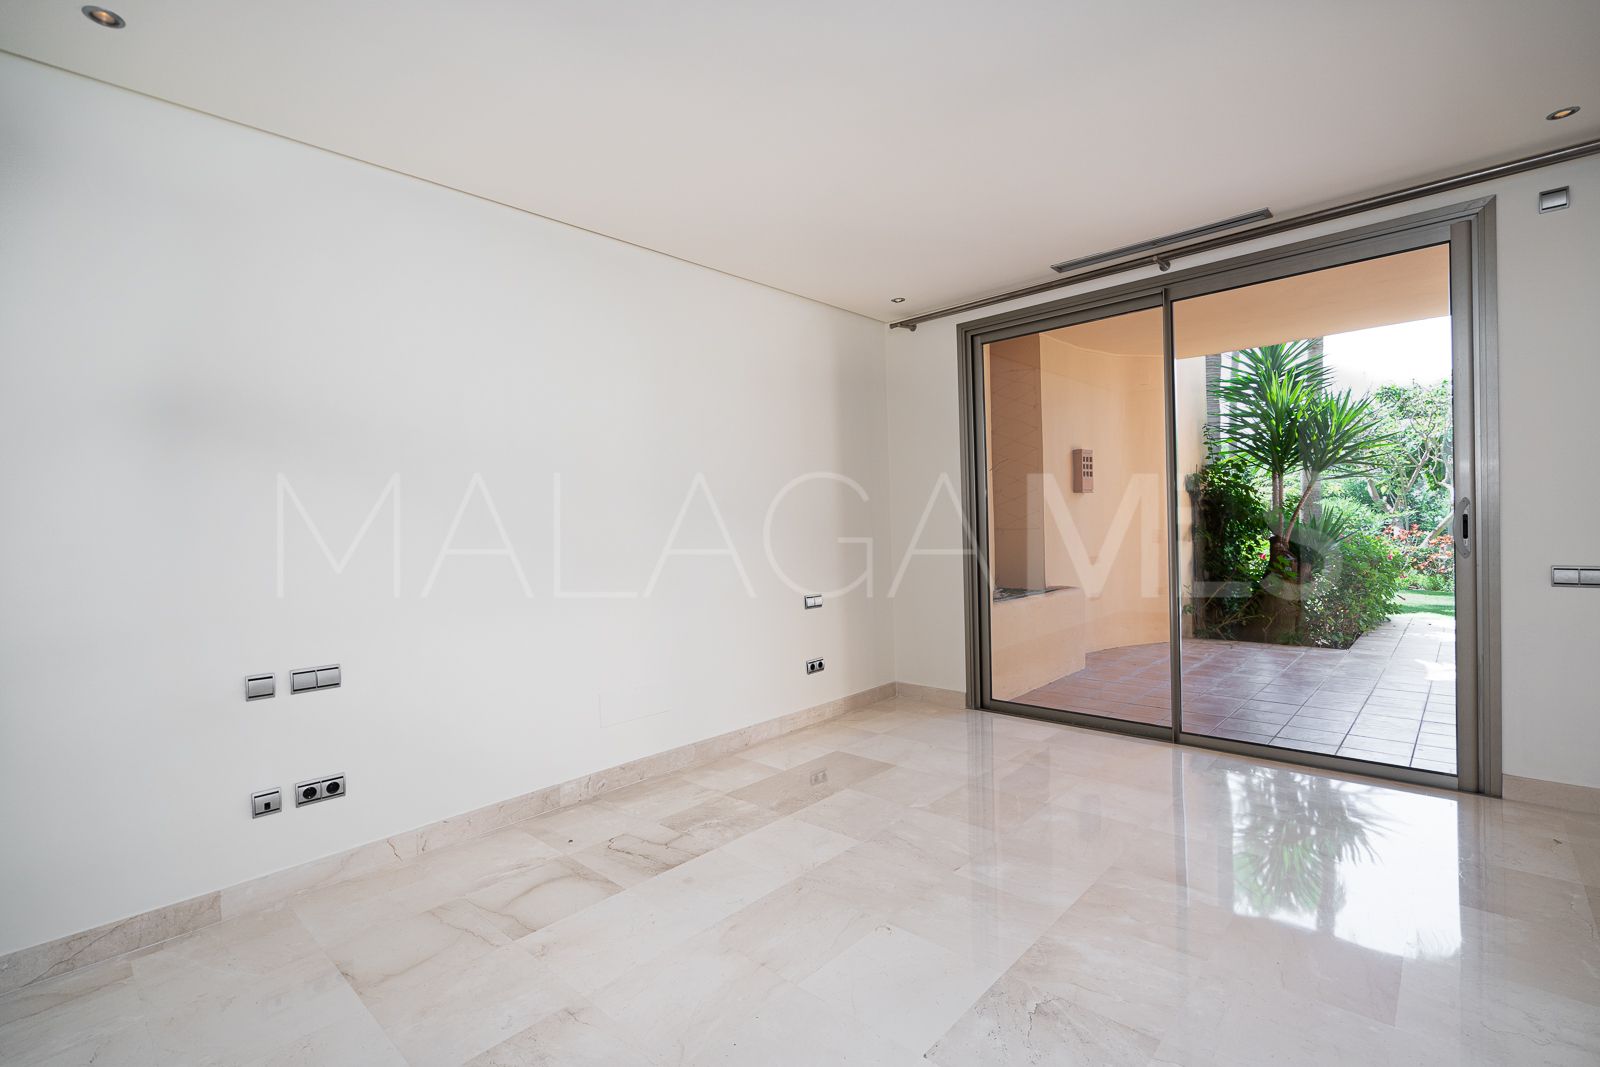 For sale ground floor apartment in Mansion Club with 2 bedrooms